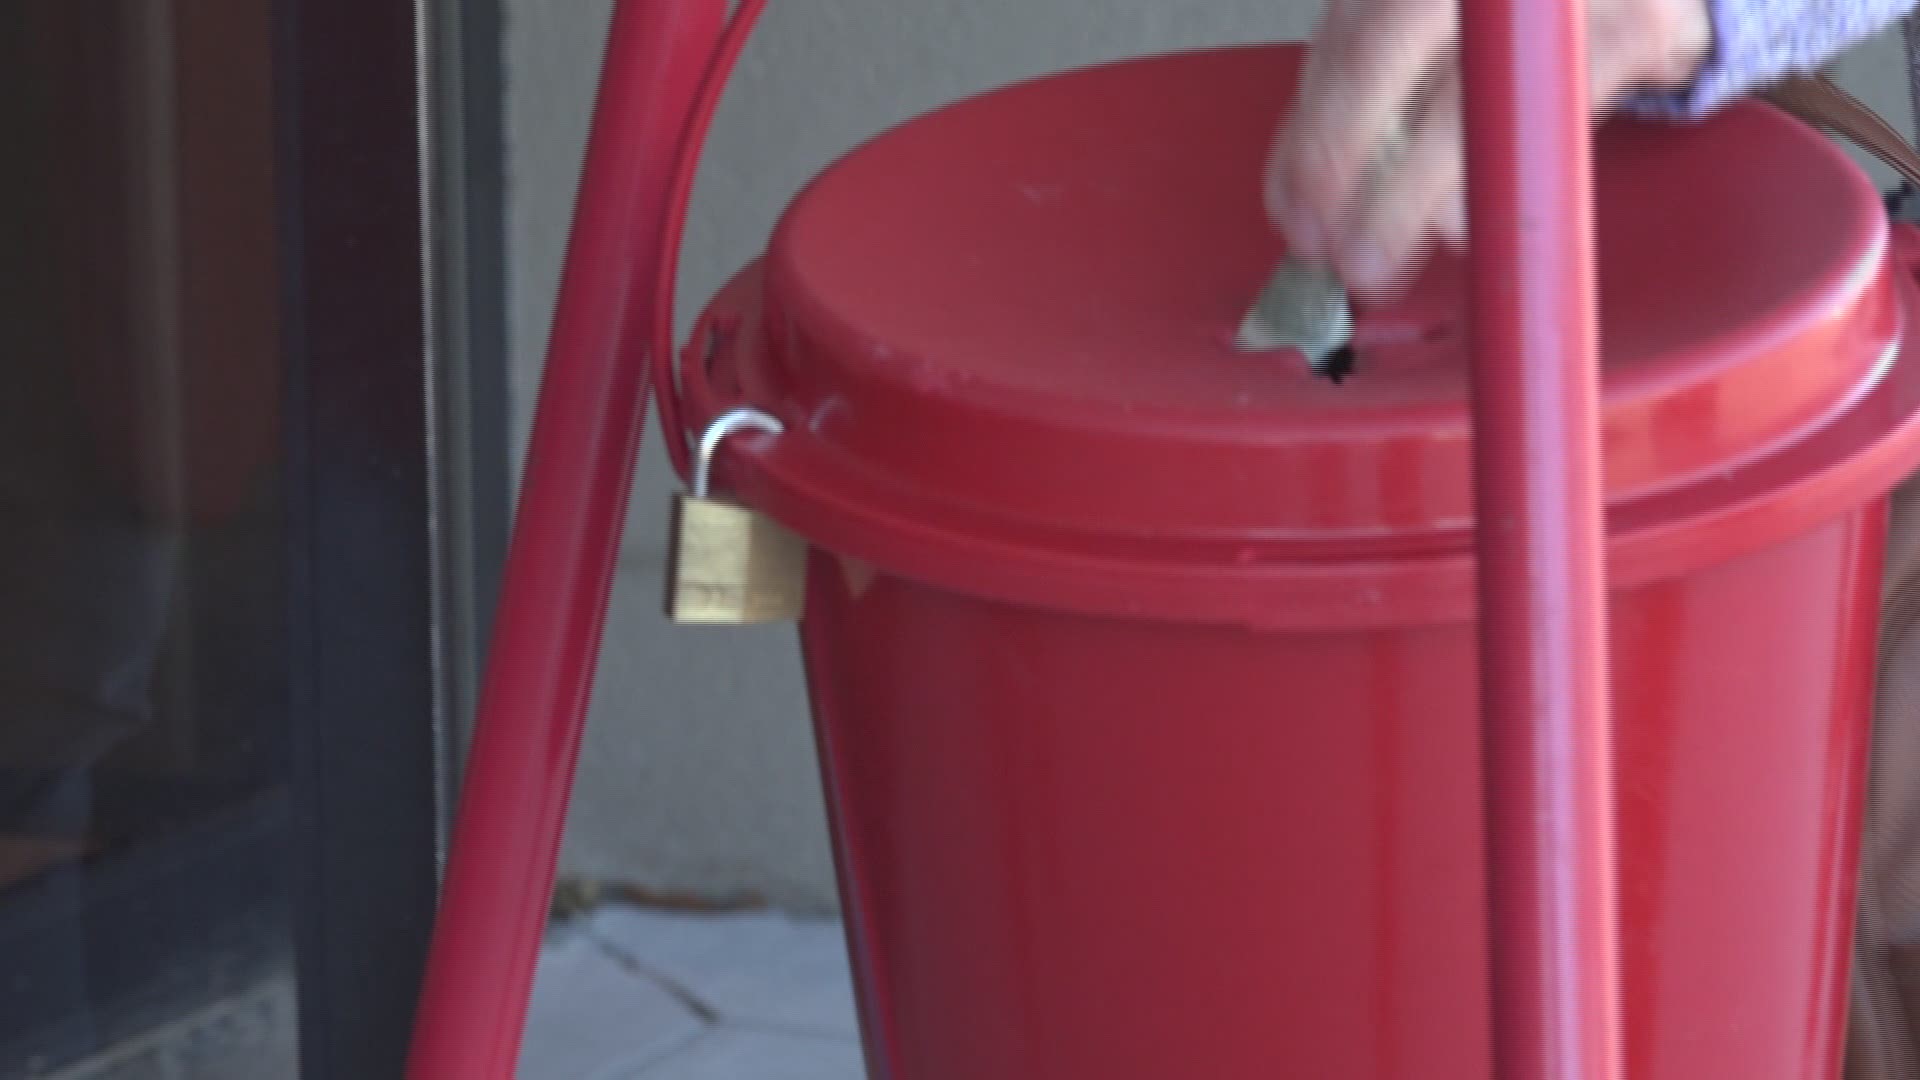 Because Thanksgiving is so late this year, the Salvation Army is expected to lose thousands in donation dollars.